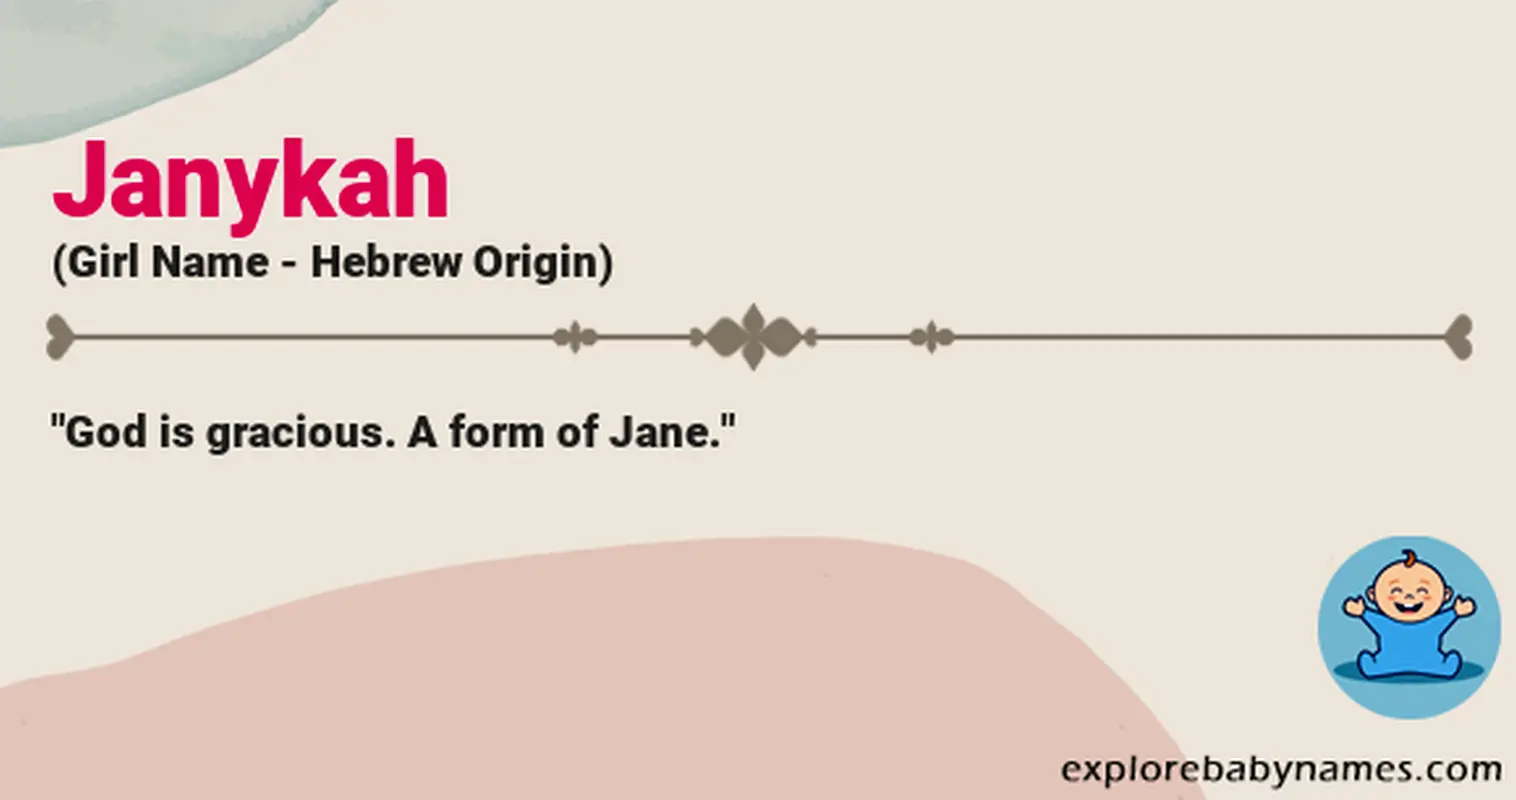 Meaning of Janykah